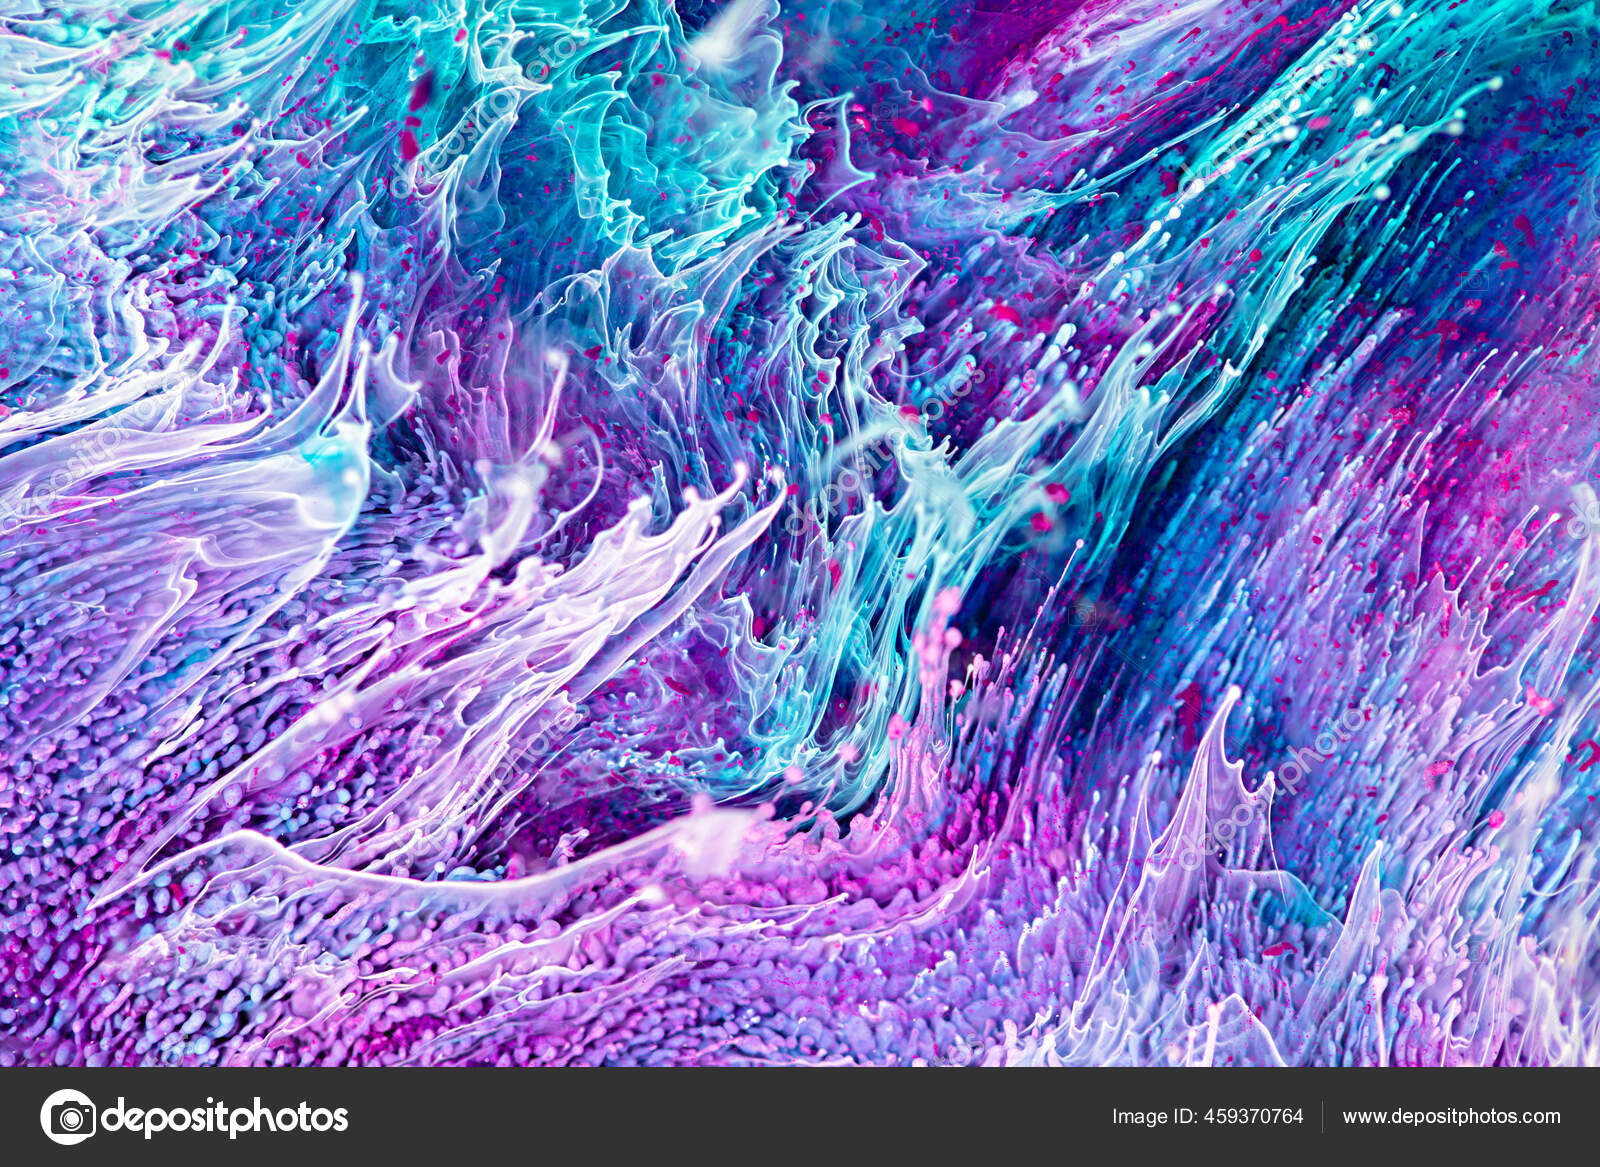 Epoxy resin paint with turquoise, purple and white colors. Liquid  background with splashes and ripples. Modern abstract texture with alcohol  inks. Vibrant colors mixes on macrophotography picture. Stock Illustration  by ©totamilow #459370764